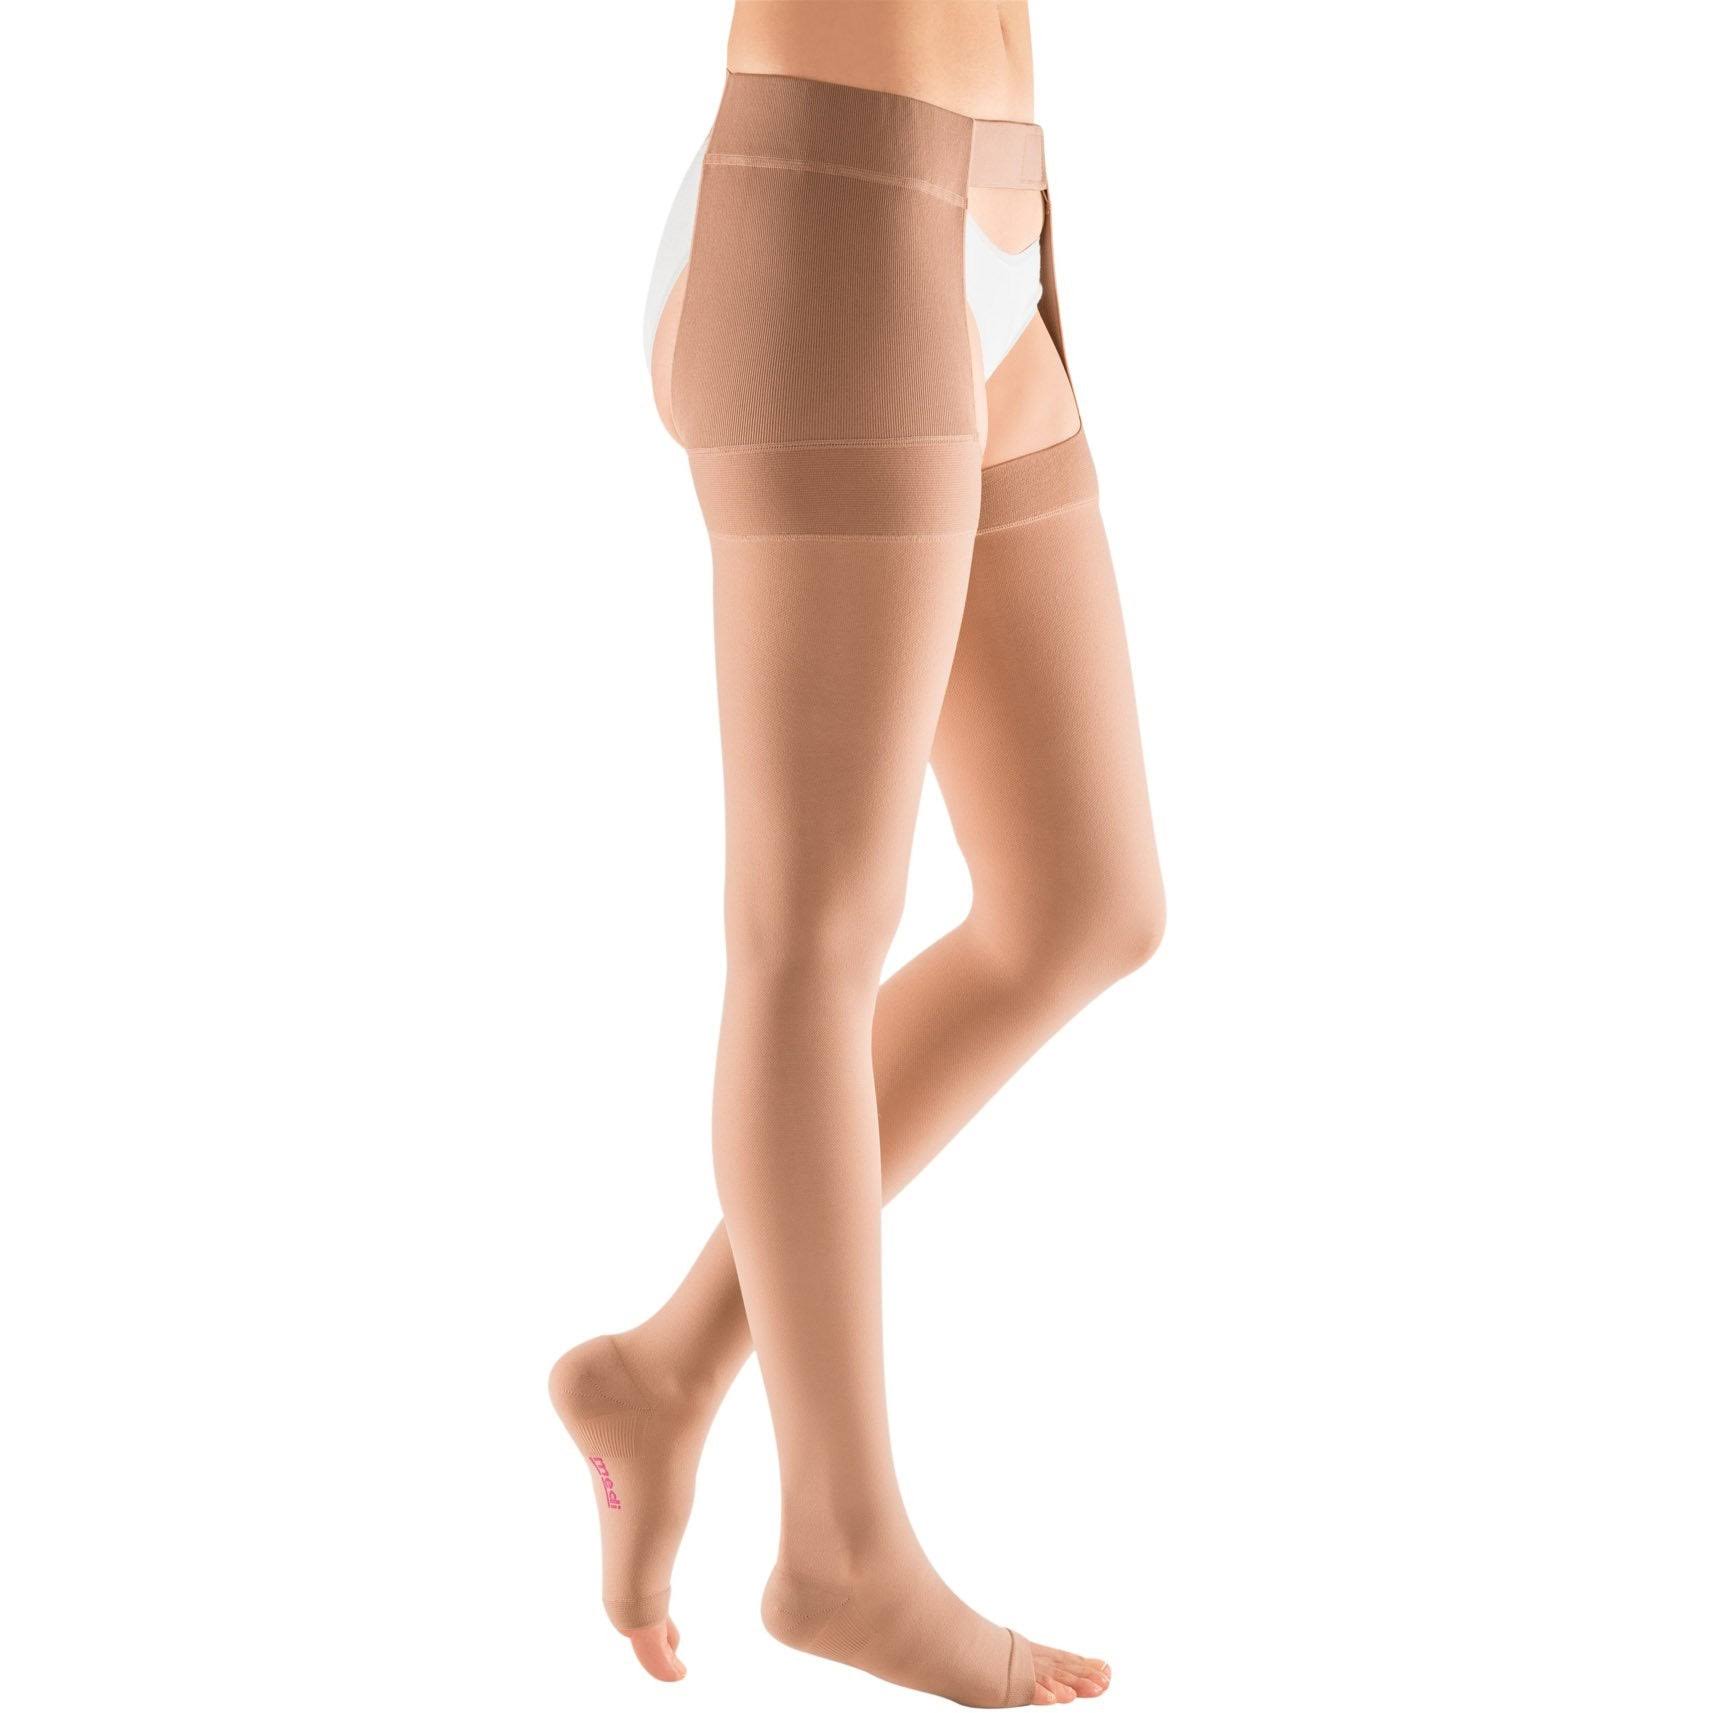 Mediven Sheer and Soft Womens Knee Highs Compression Sheer Stockings - Natural, 20-30mmHg